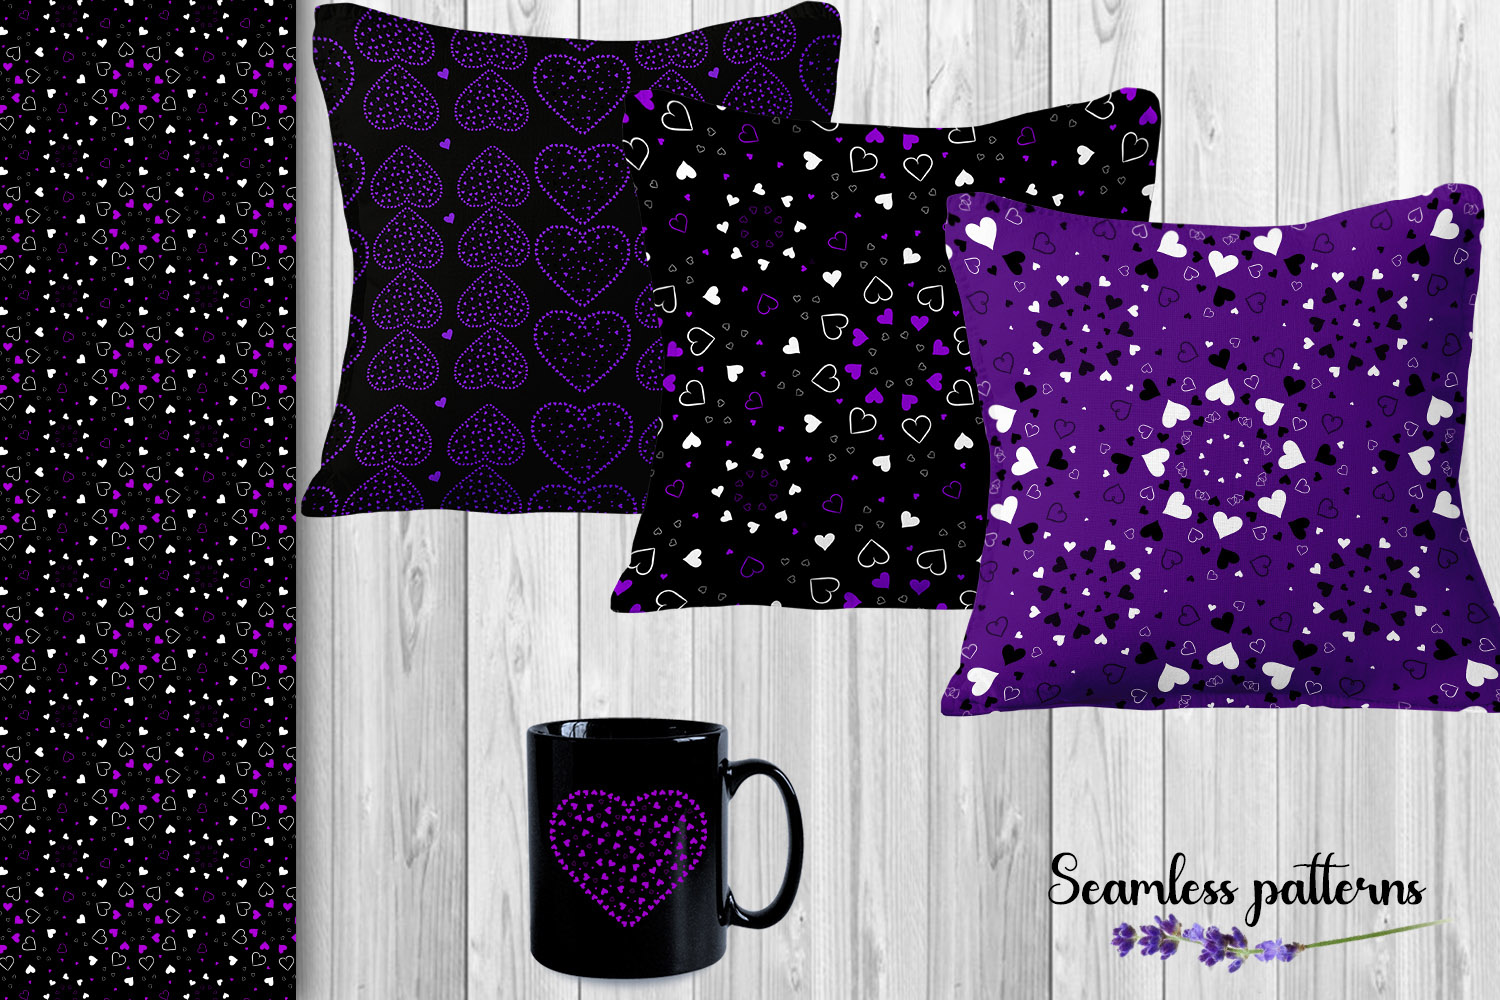 Dark pillows with small hearts shapes.